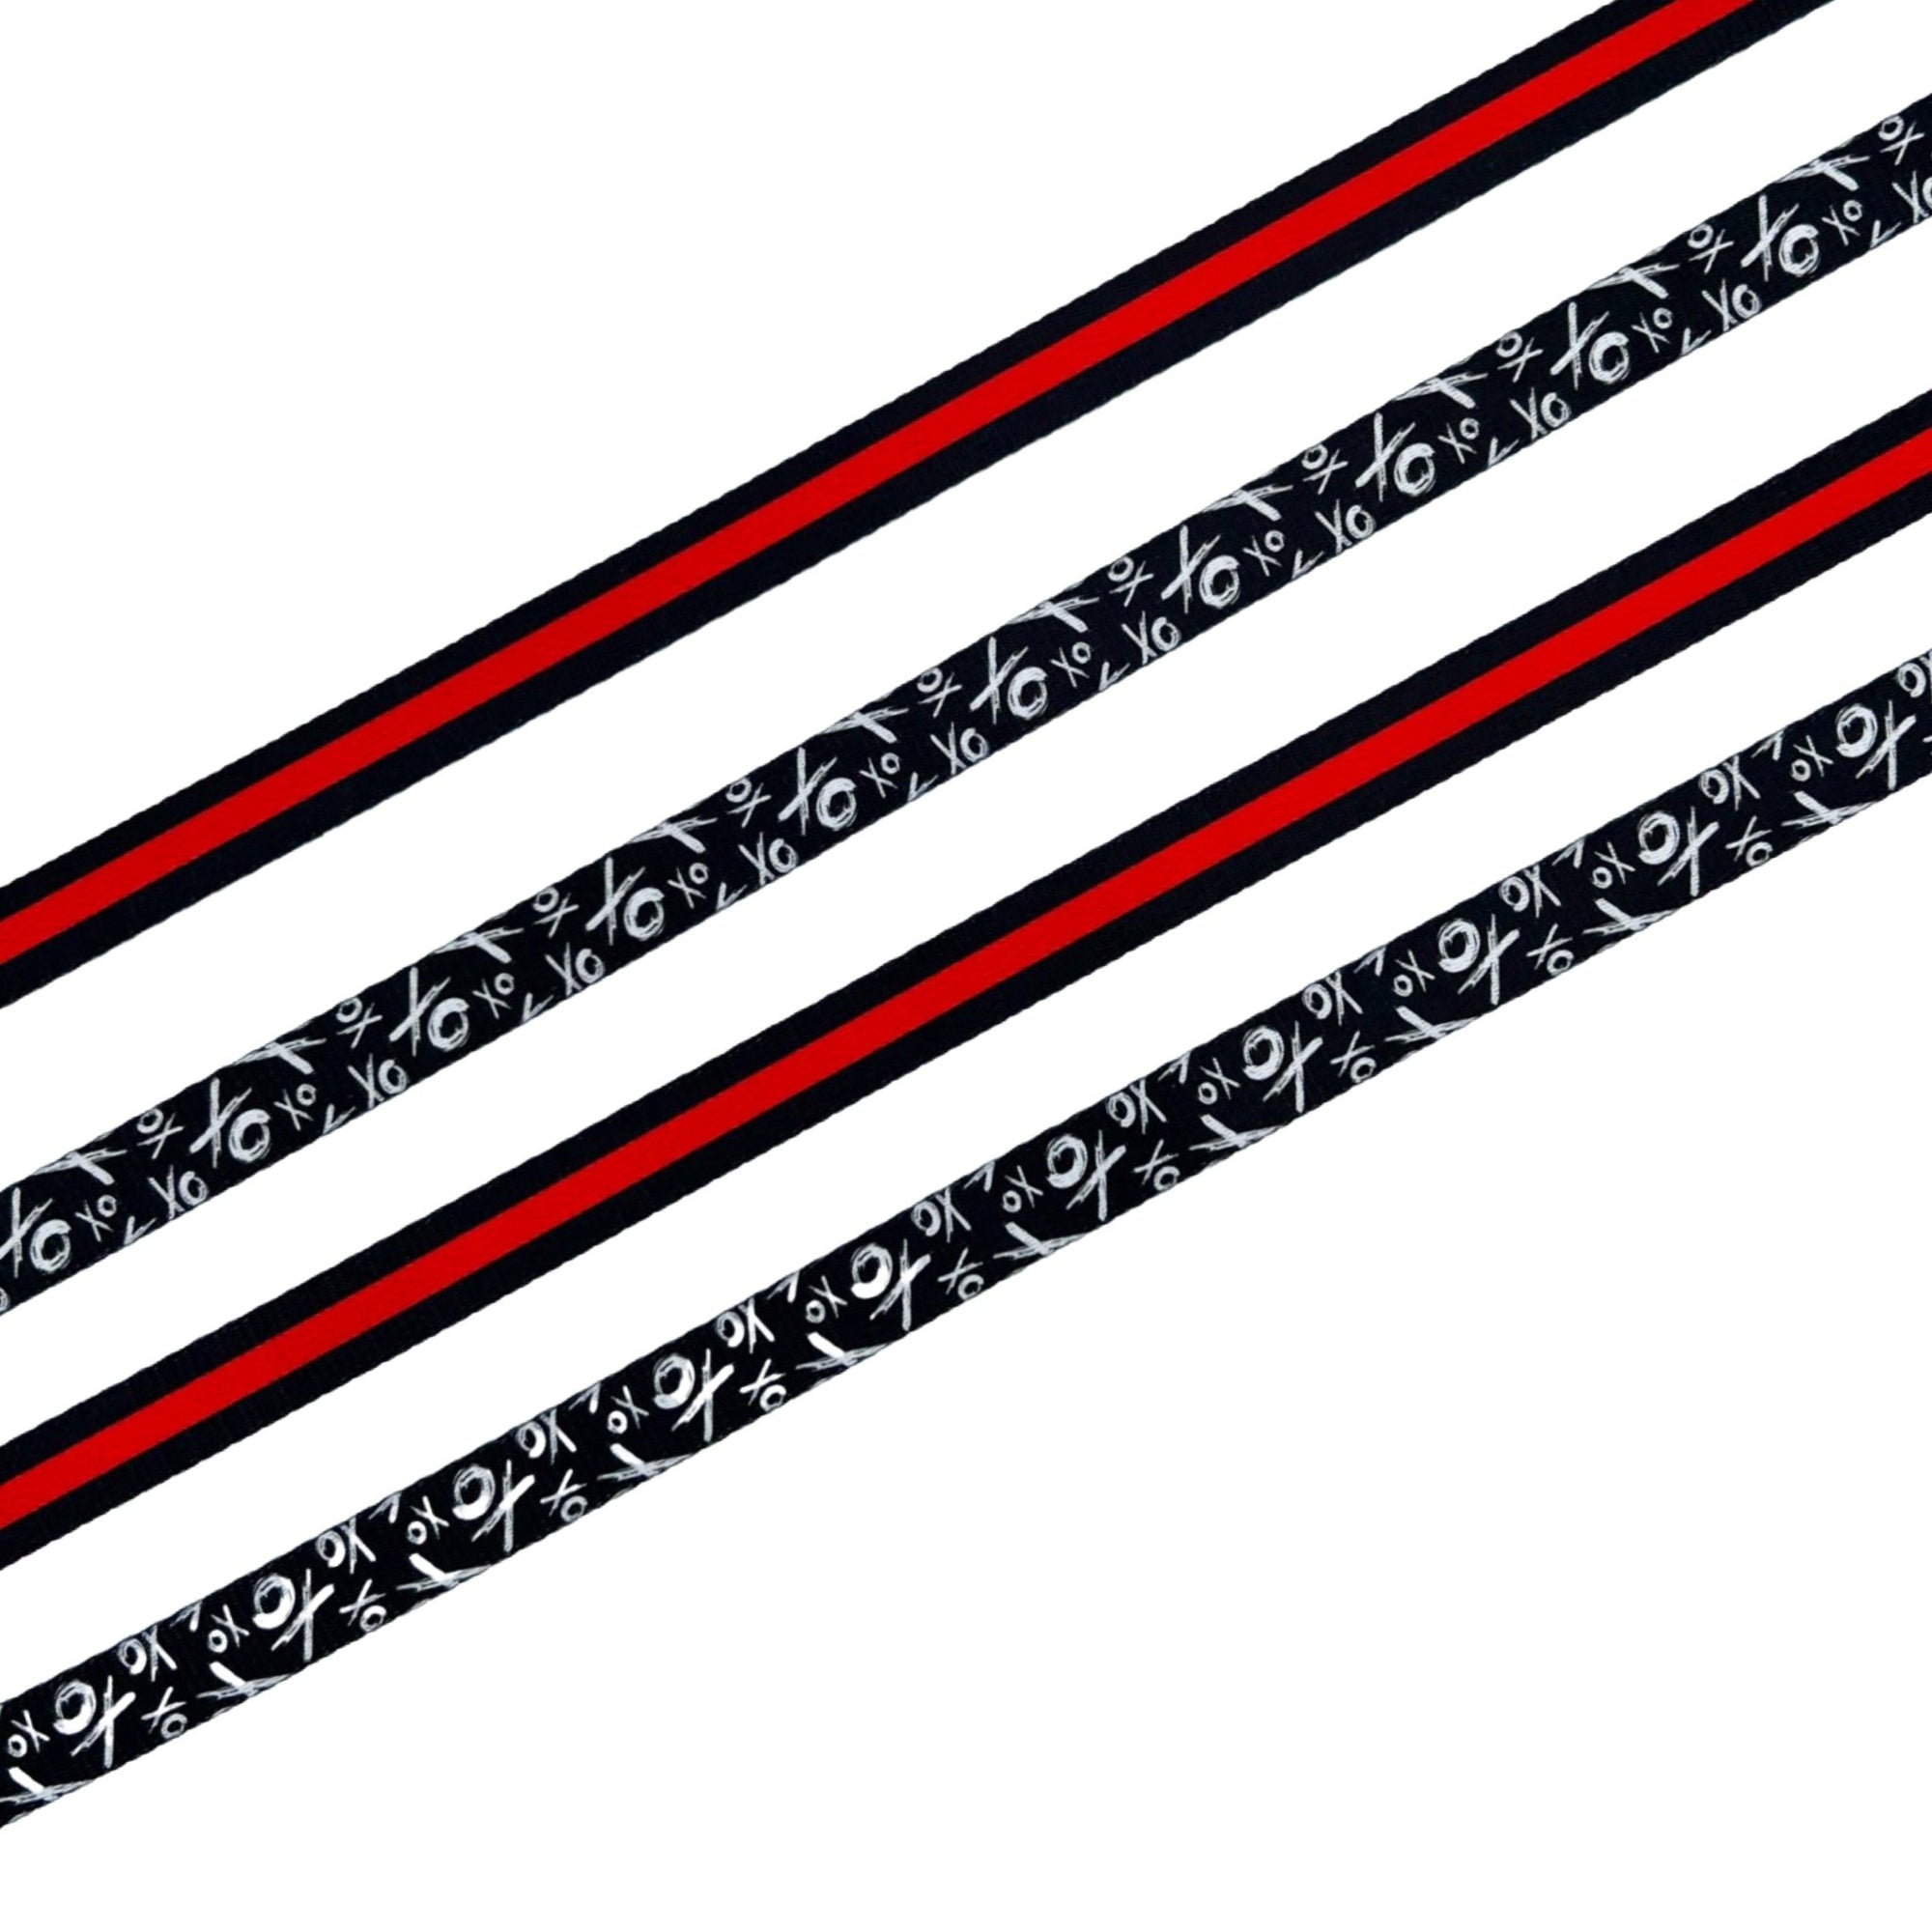 Dog Leash and Collar Set - four black with white XO&#39;s and bold red stripe nylon dog leashes - with product feature captions - against solid white background - Wag Trendz